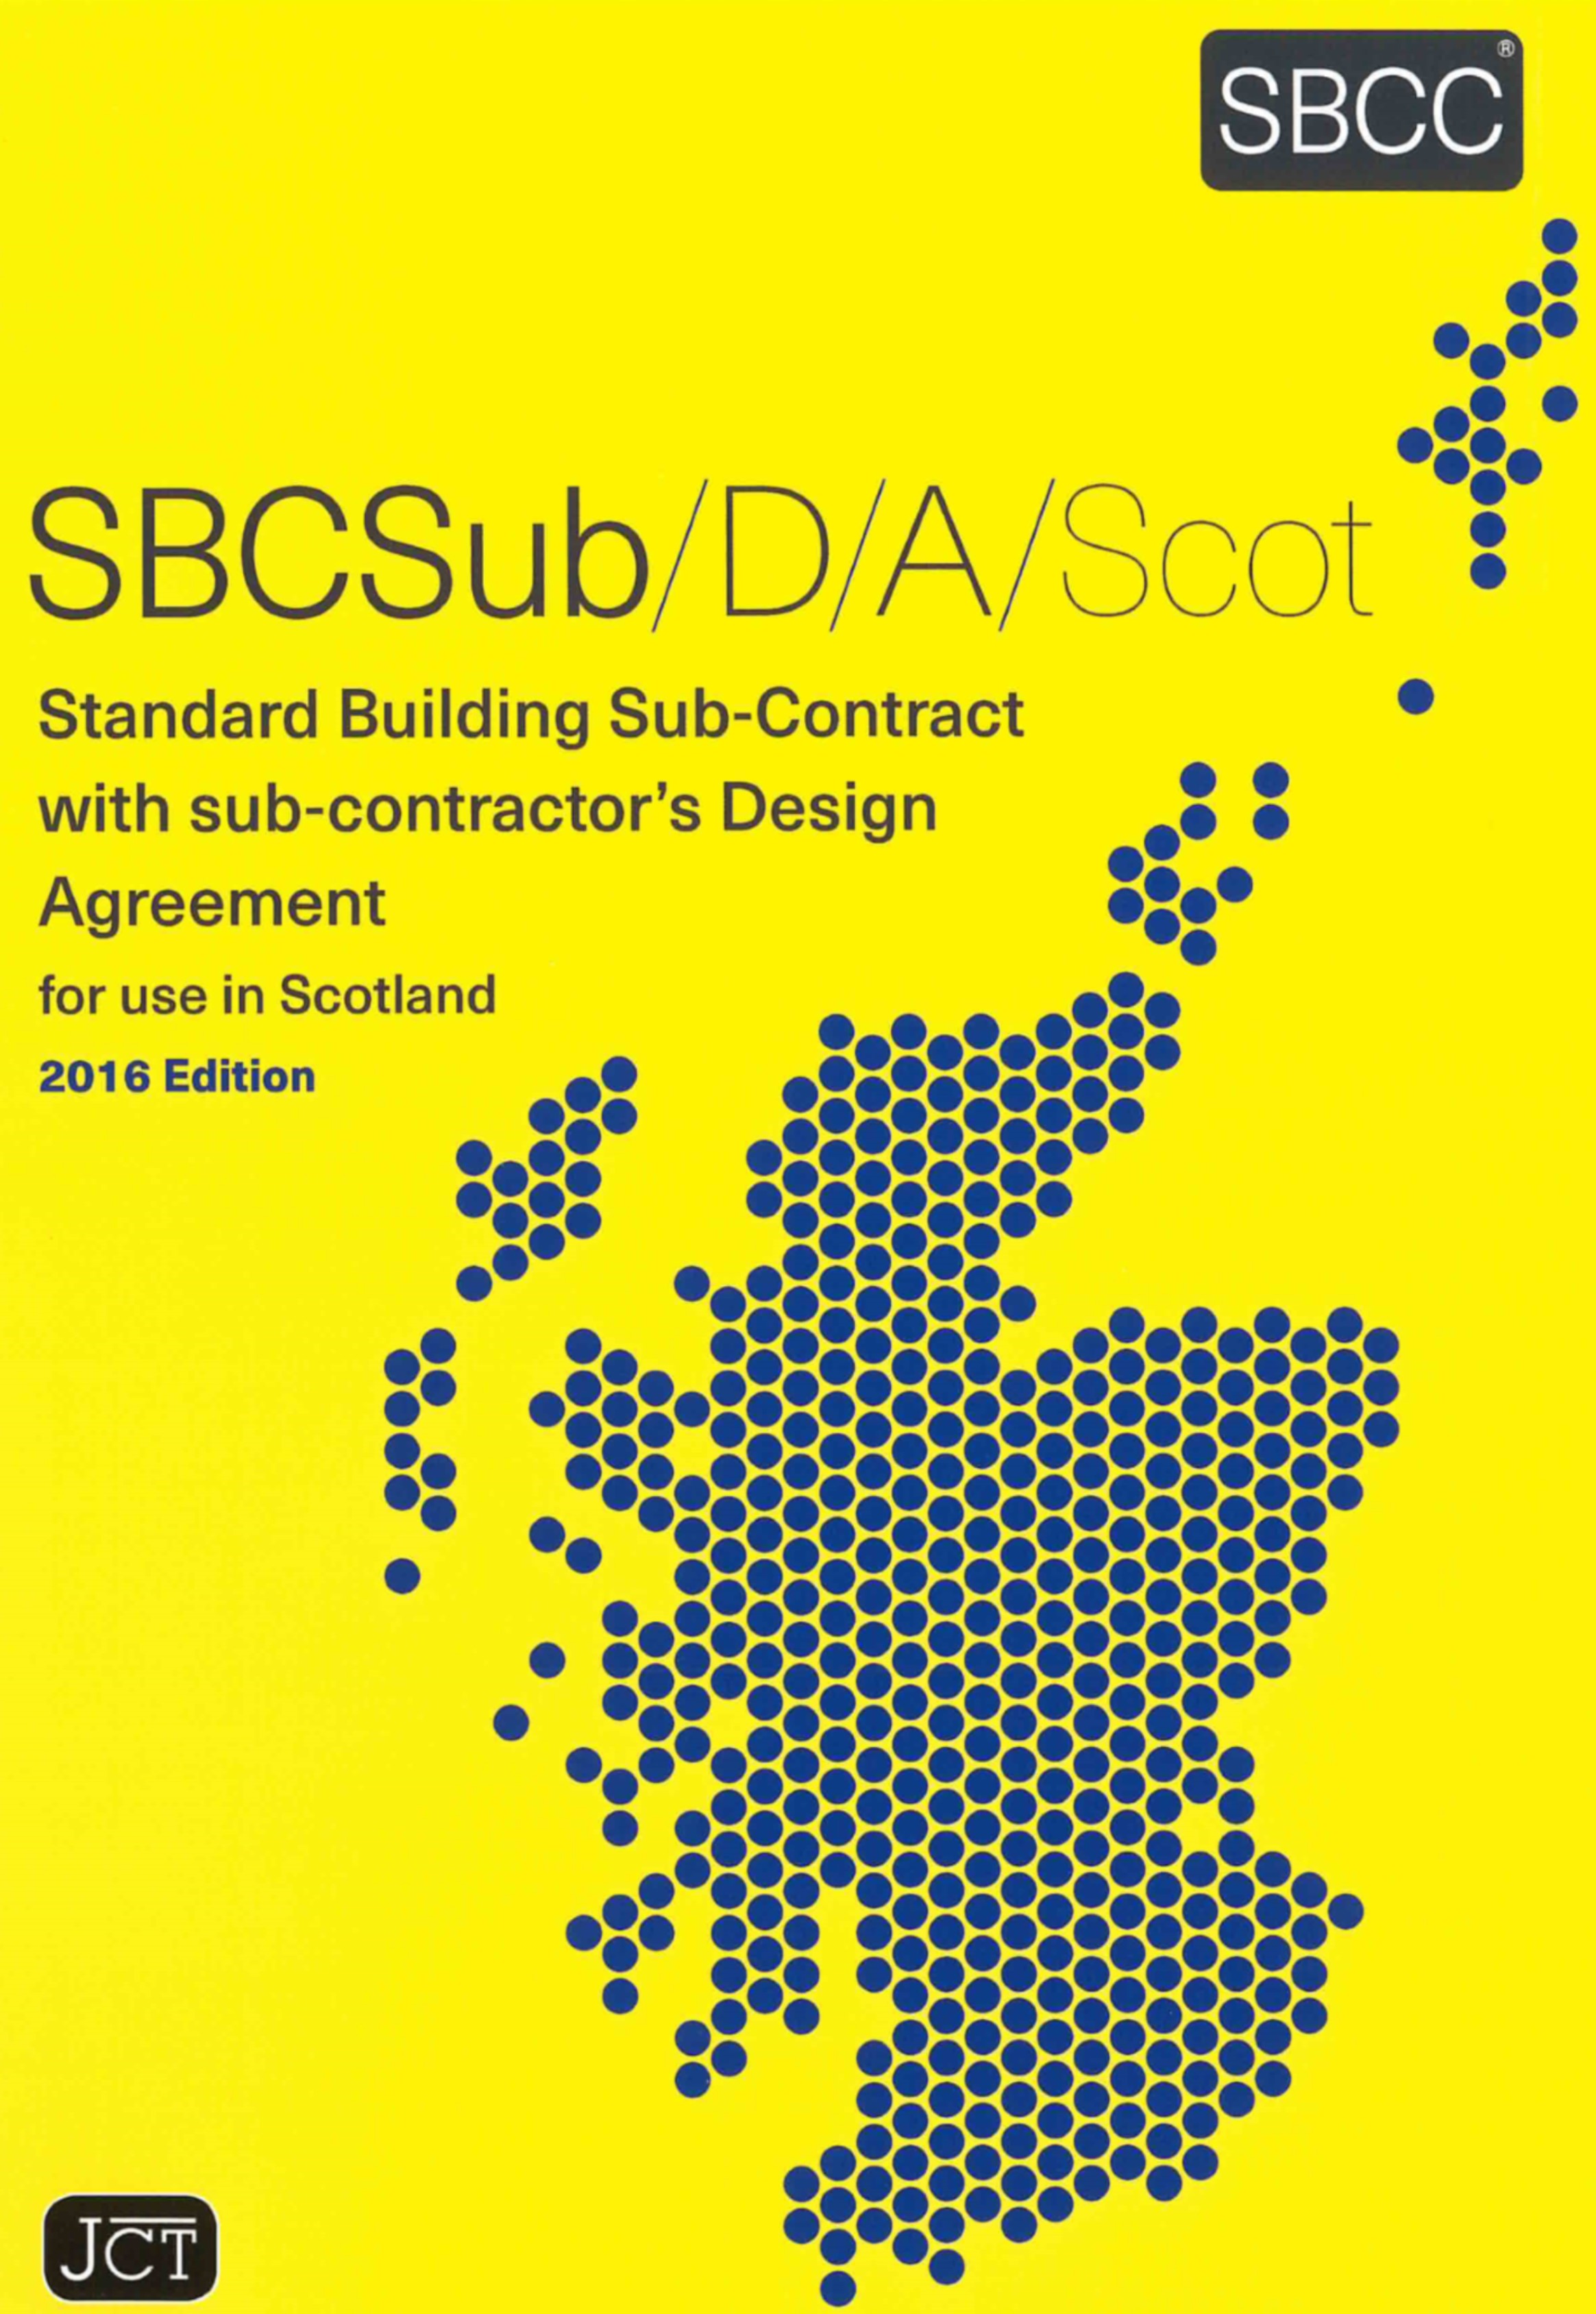 Contract front page